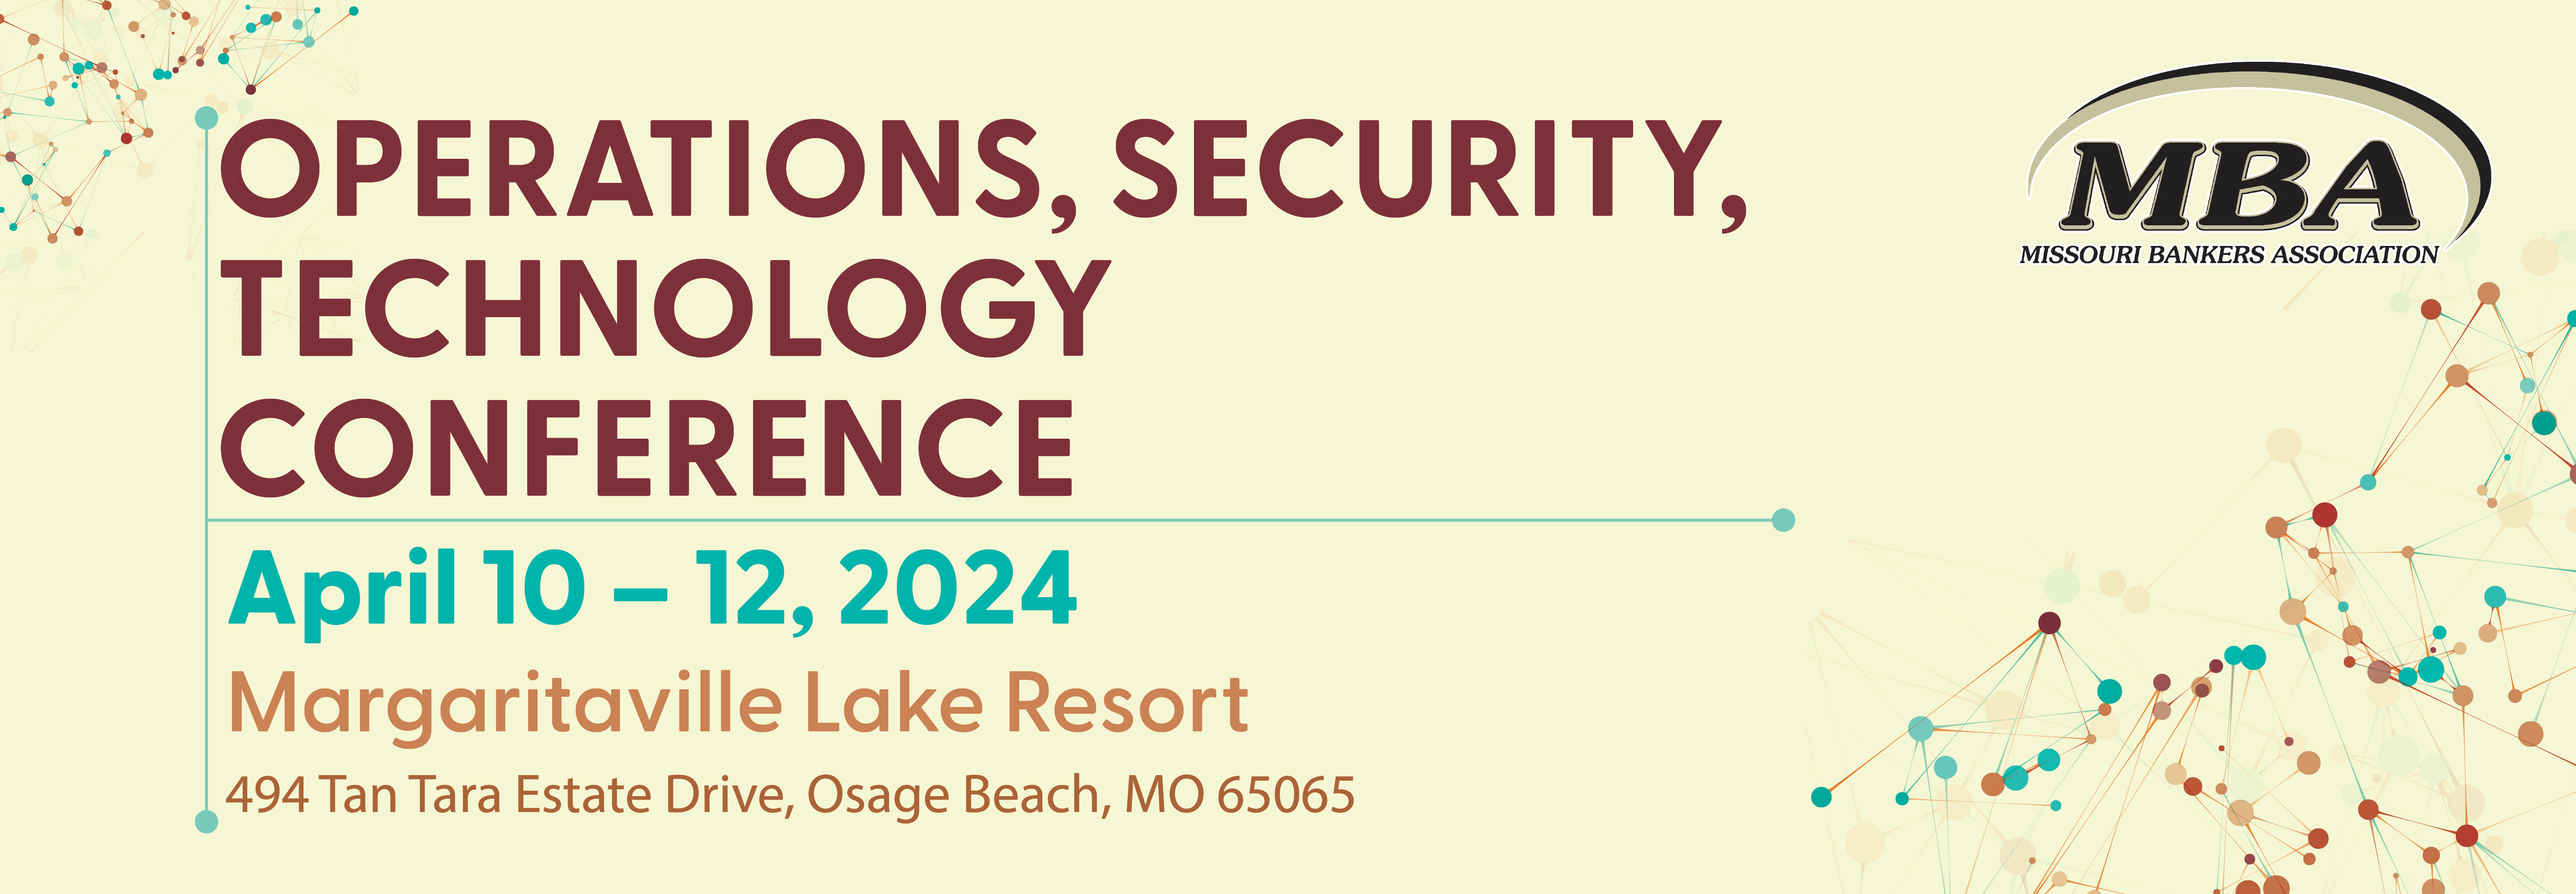 MBA 2024 Operations, Security, Technology Conference